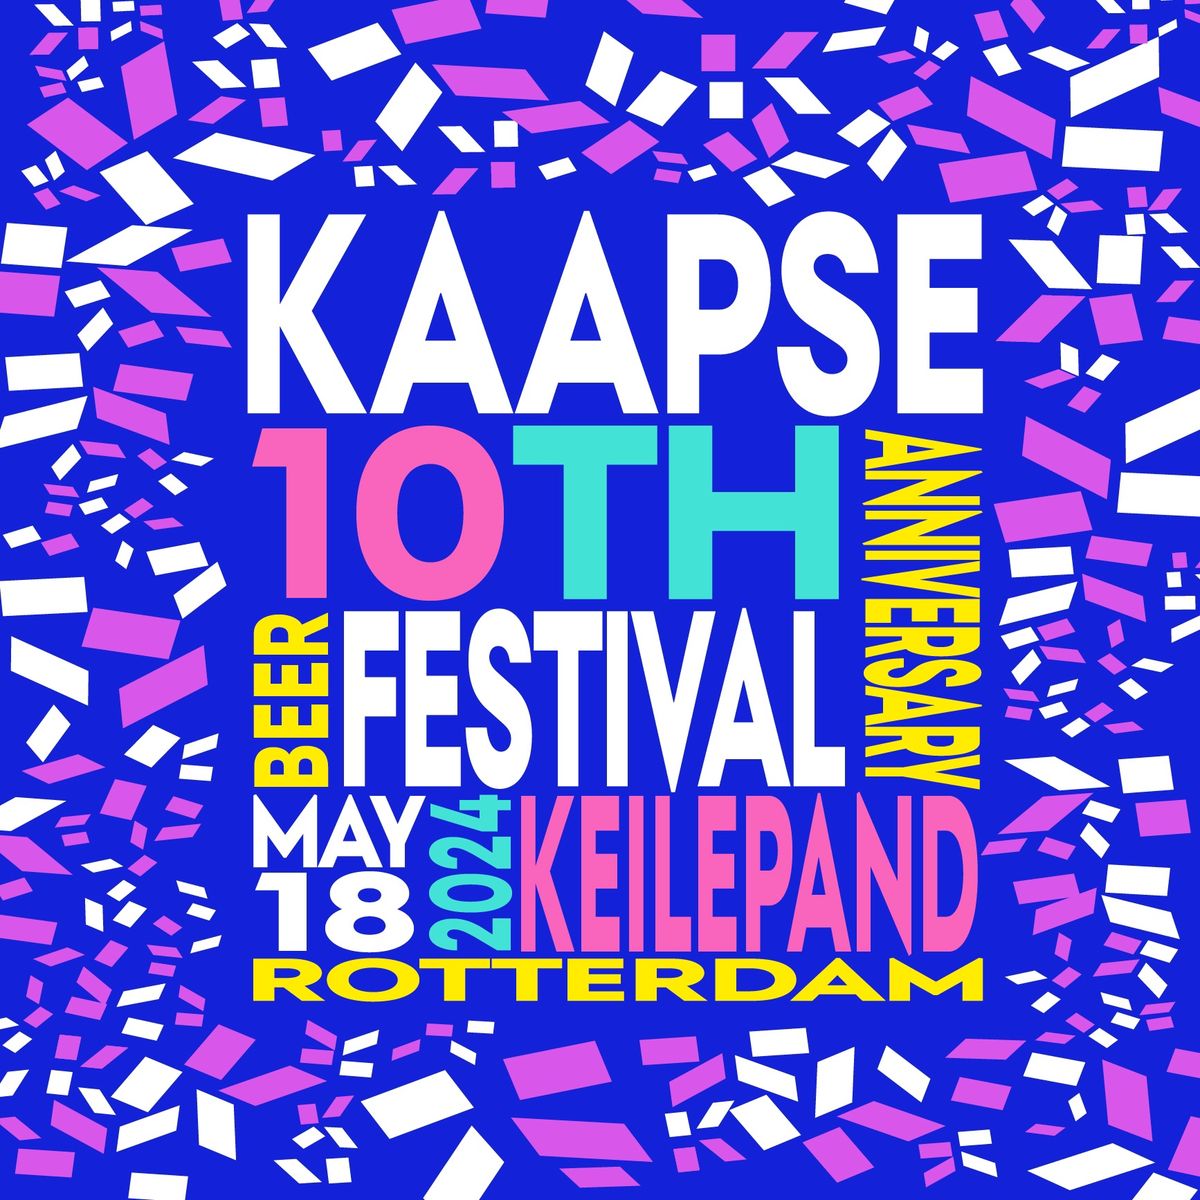 Kaapse Brouwers 10th anniversary Beer Festival